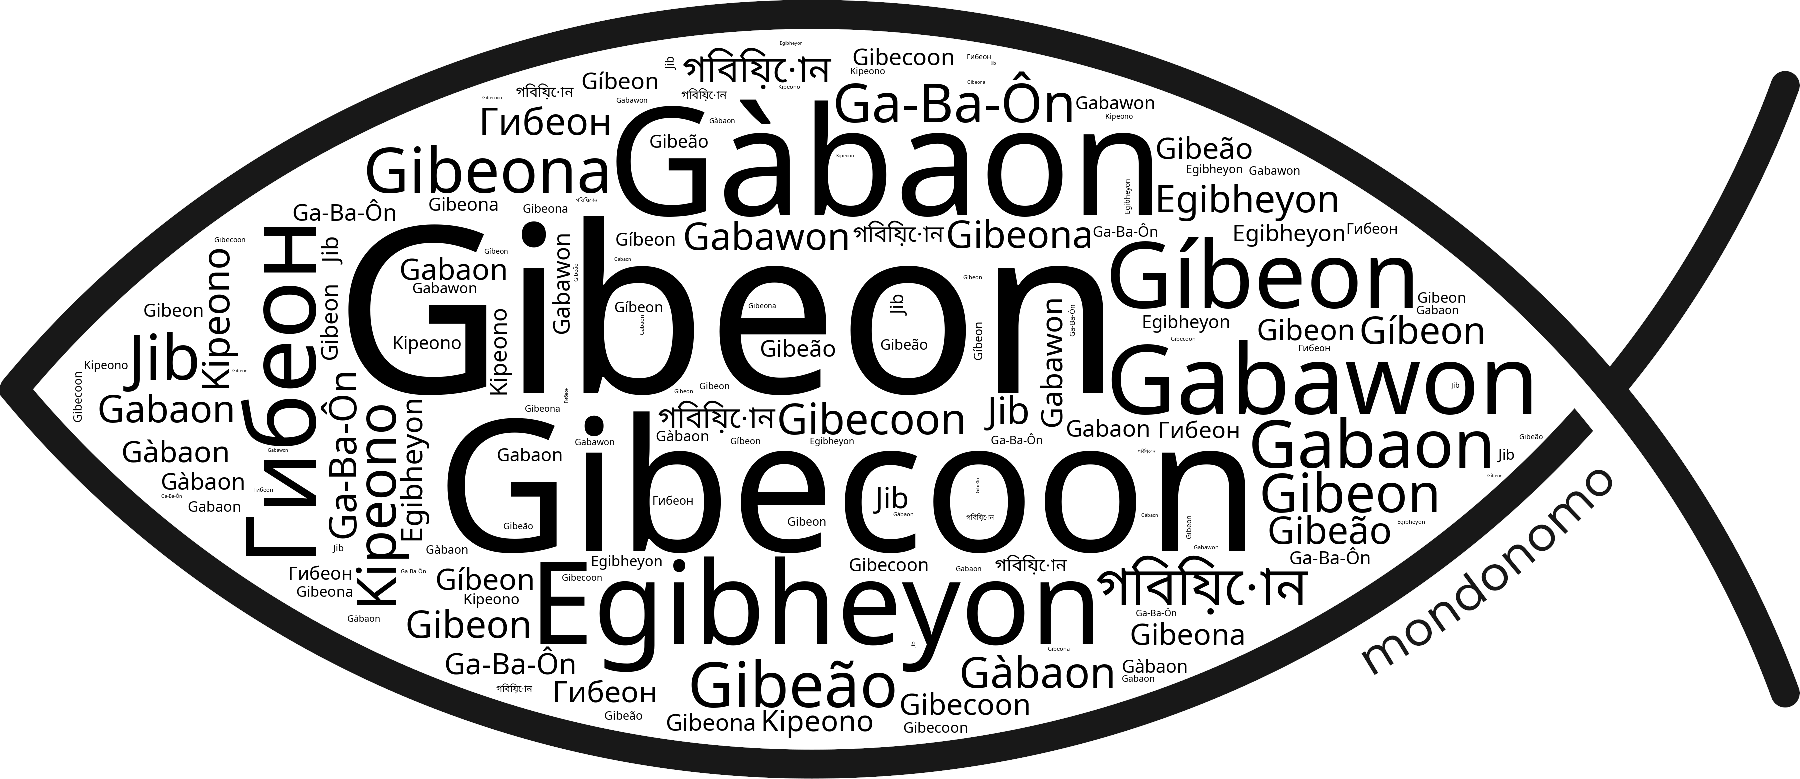 Name Gibeon in the world's Bibles